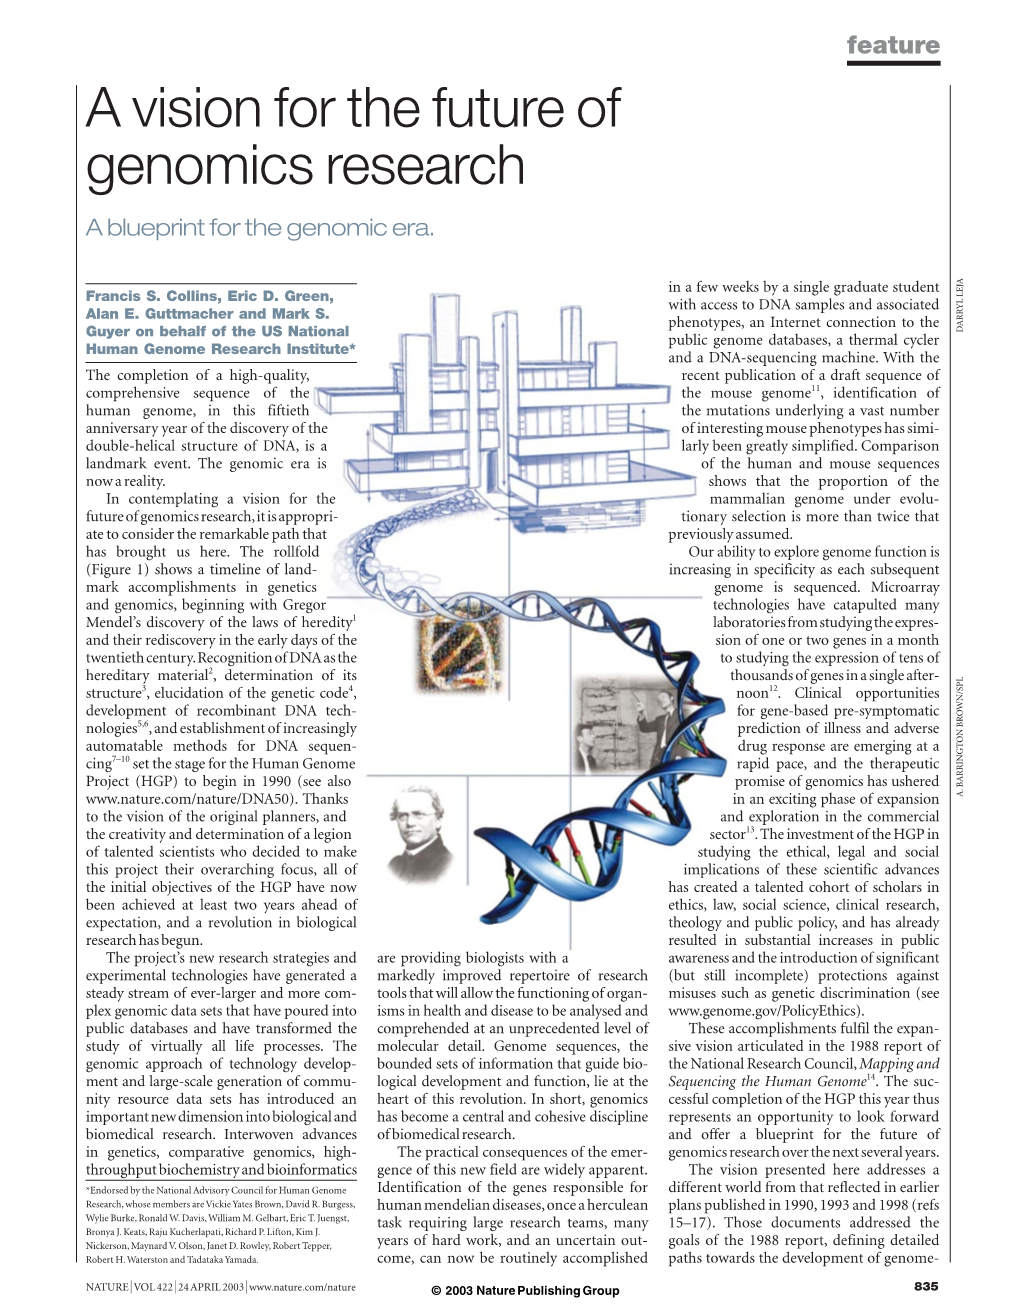 A Vision for the Future of Genomics Research a Blueprint for the Genomic Era